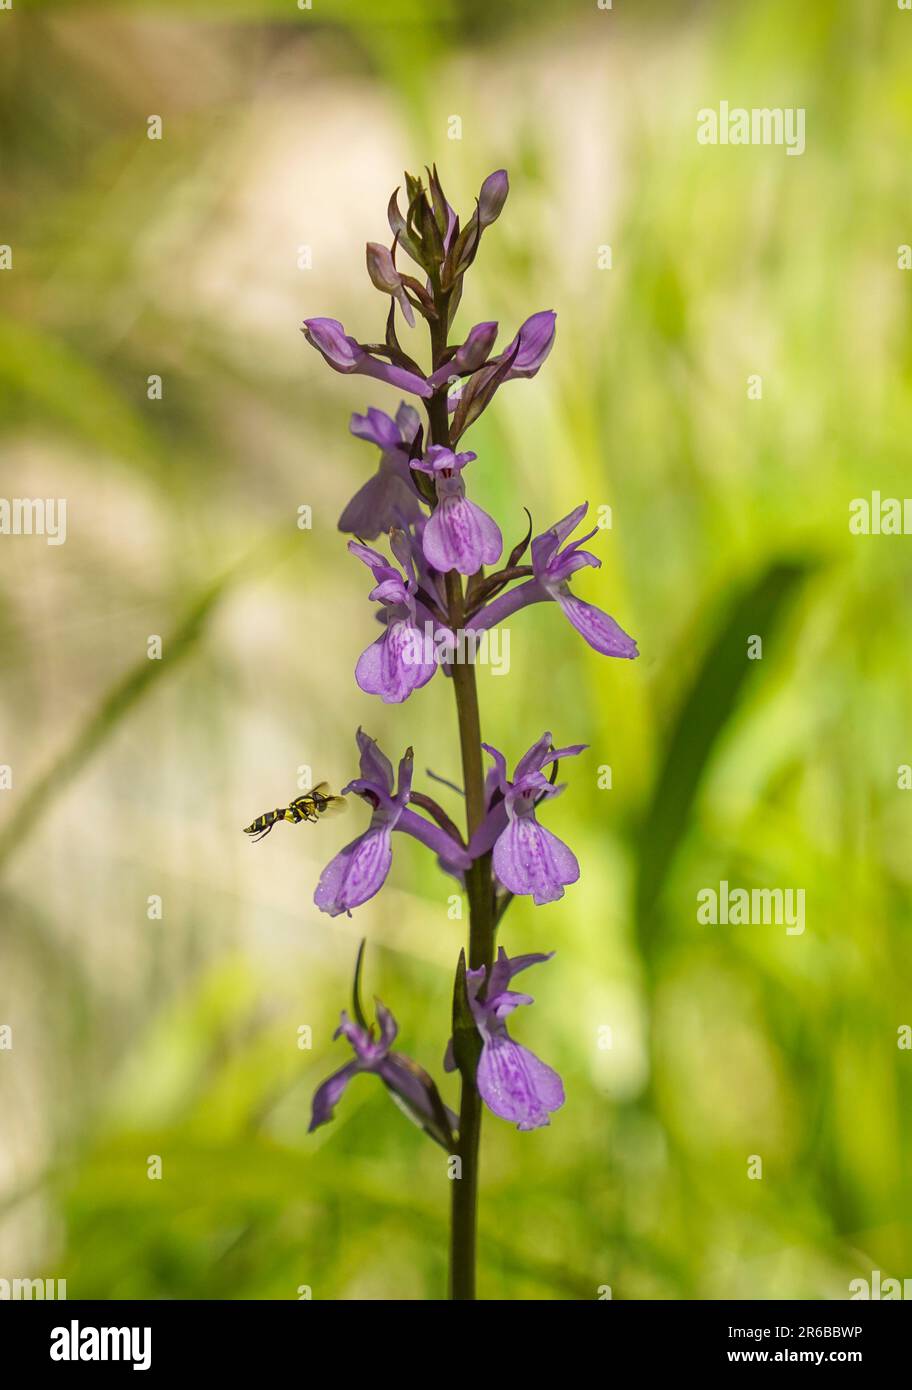 Flower detail of wild orchid, Dactylorhiza elata, robust marsh orchid next to stream, Andalucia, Spain. Stock Photo